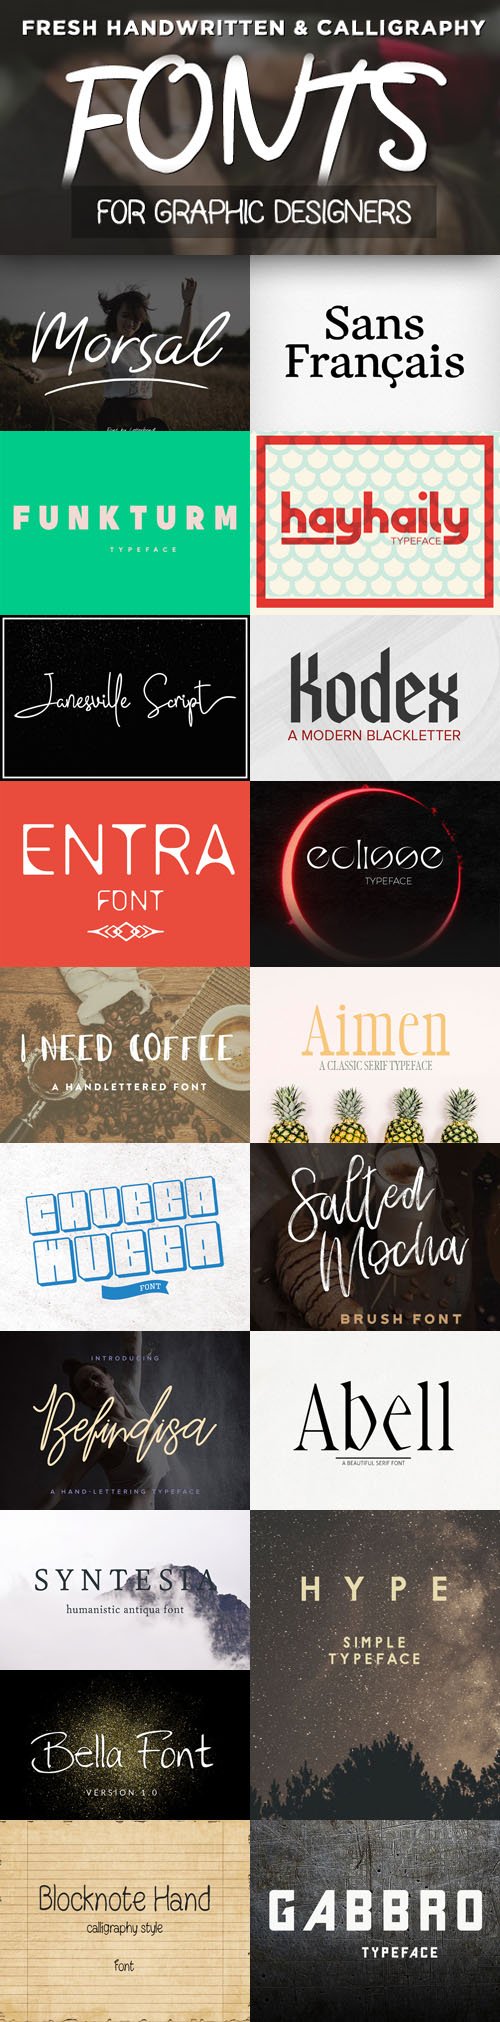 19 Fresh Fonts for Web & Graphic Designers